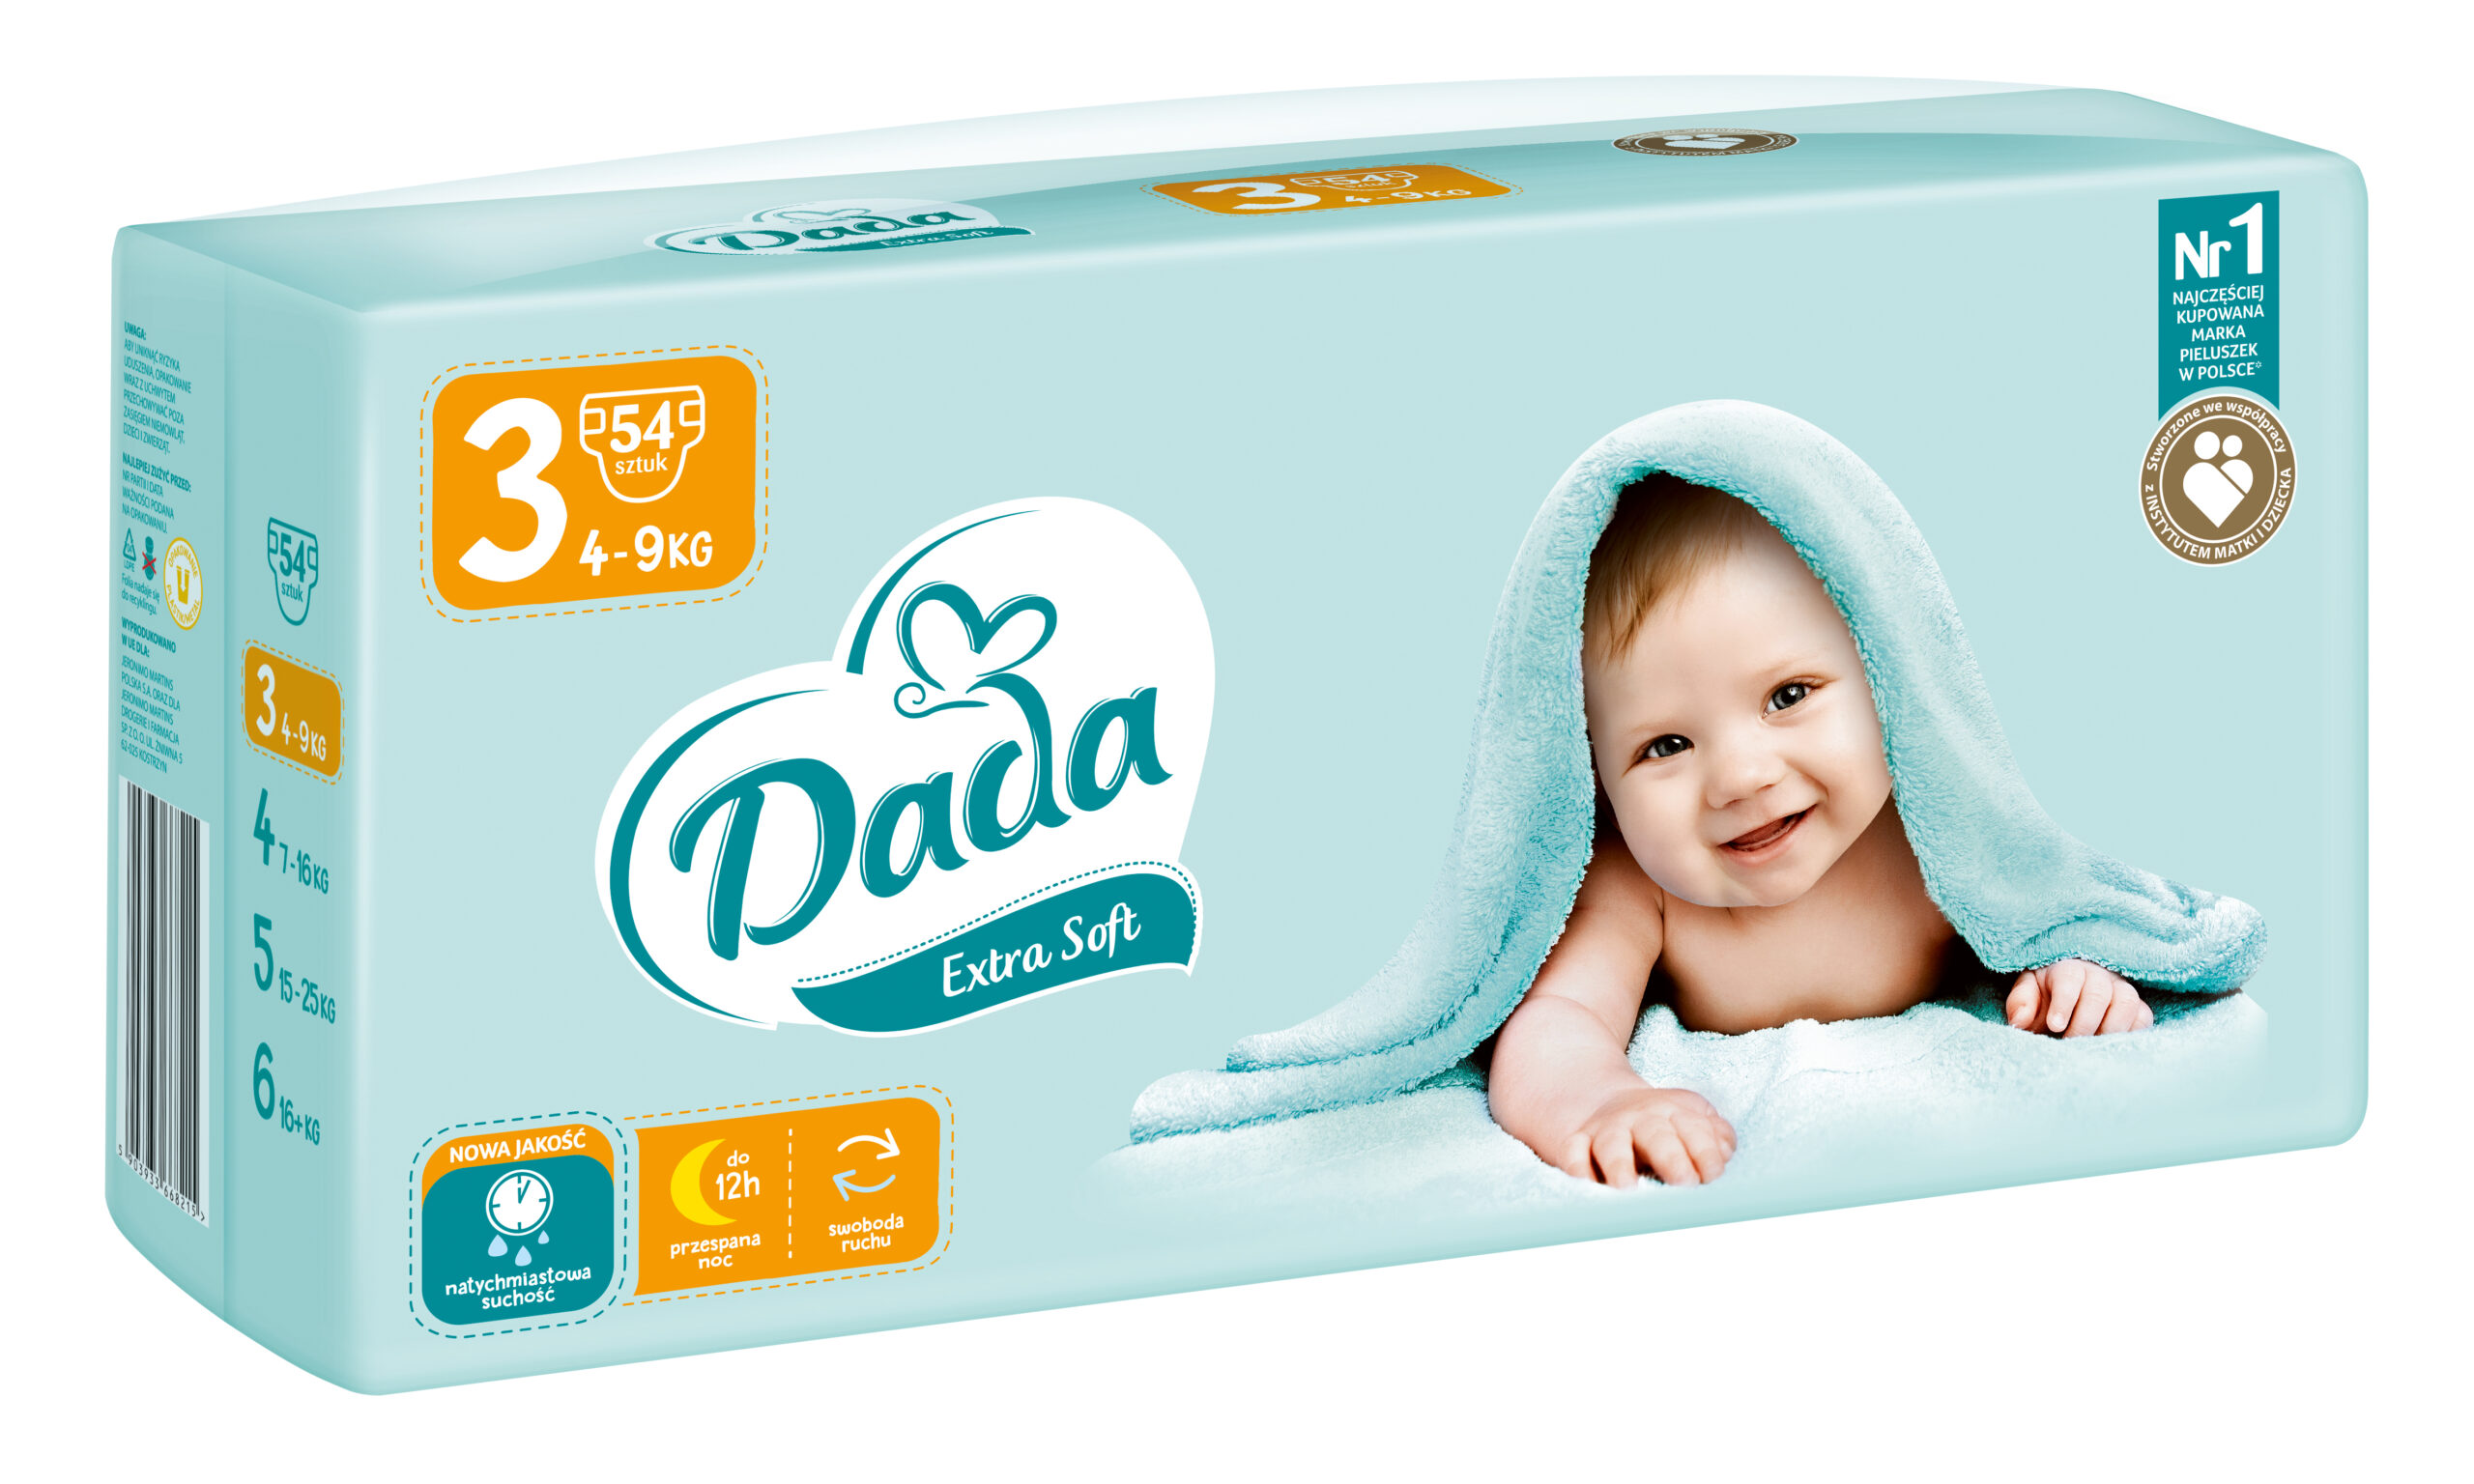 pampers baby protection 2